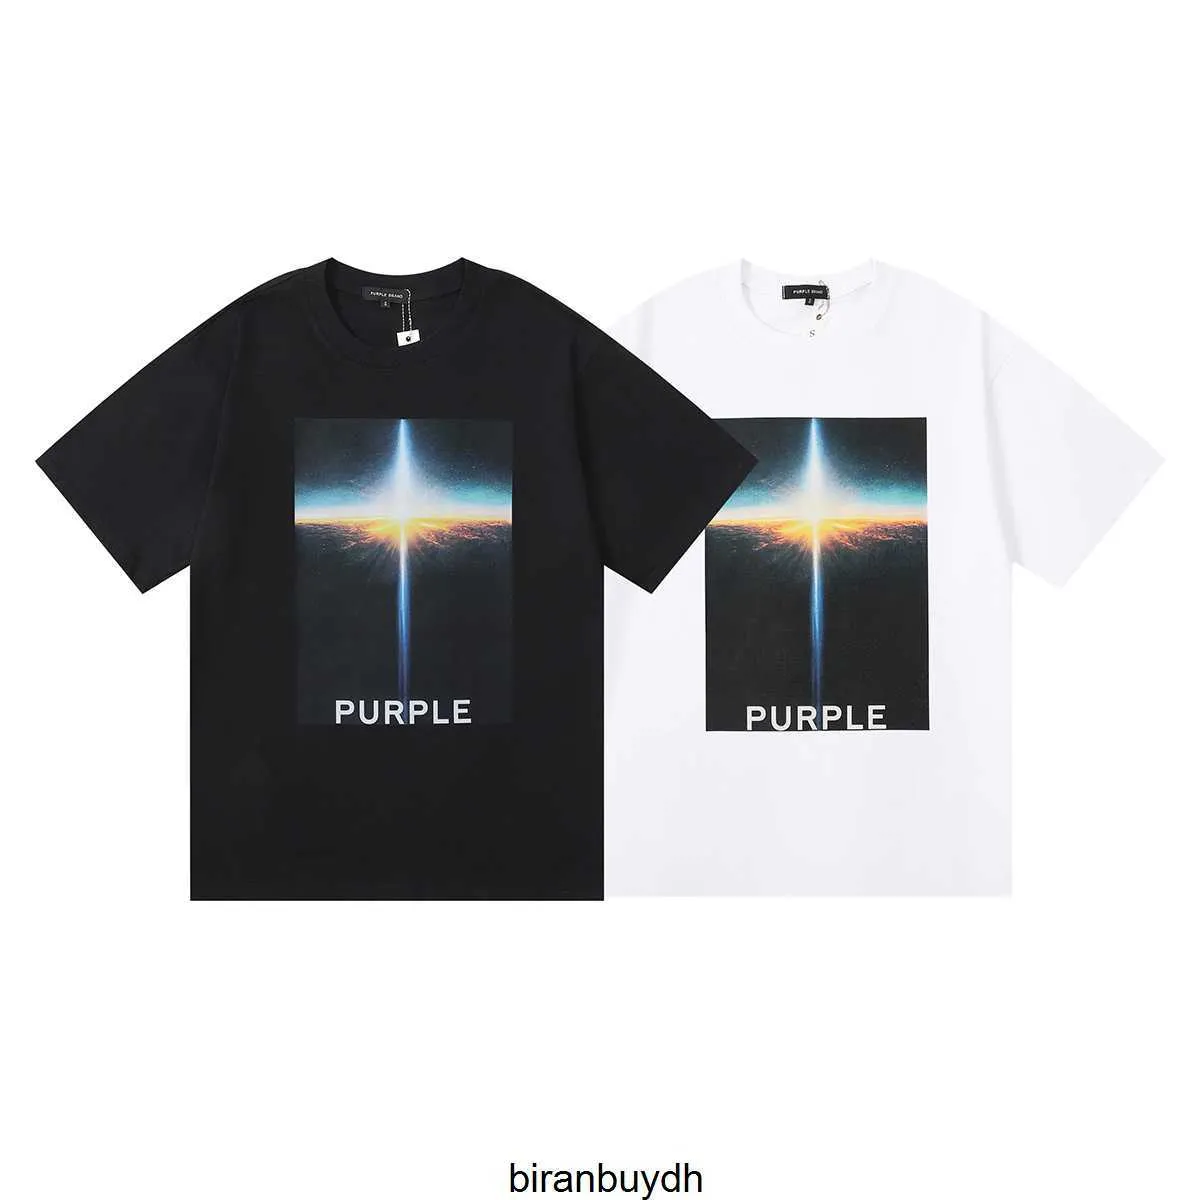 High Quality American Fashion Brand Purple Brand Cloud Sea Sunrise High-definition Printed Mens and Womens Loose Fitting Casual Short Sleeved T-shirt